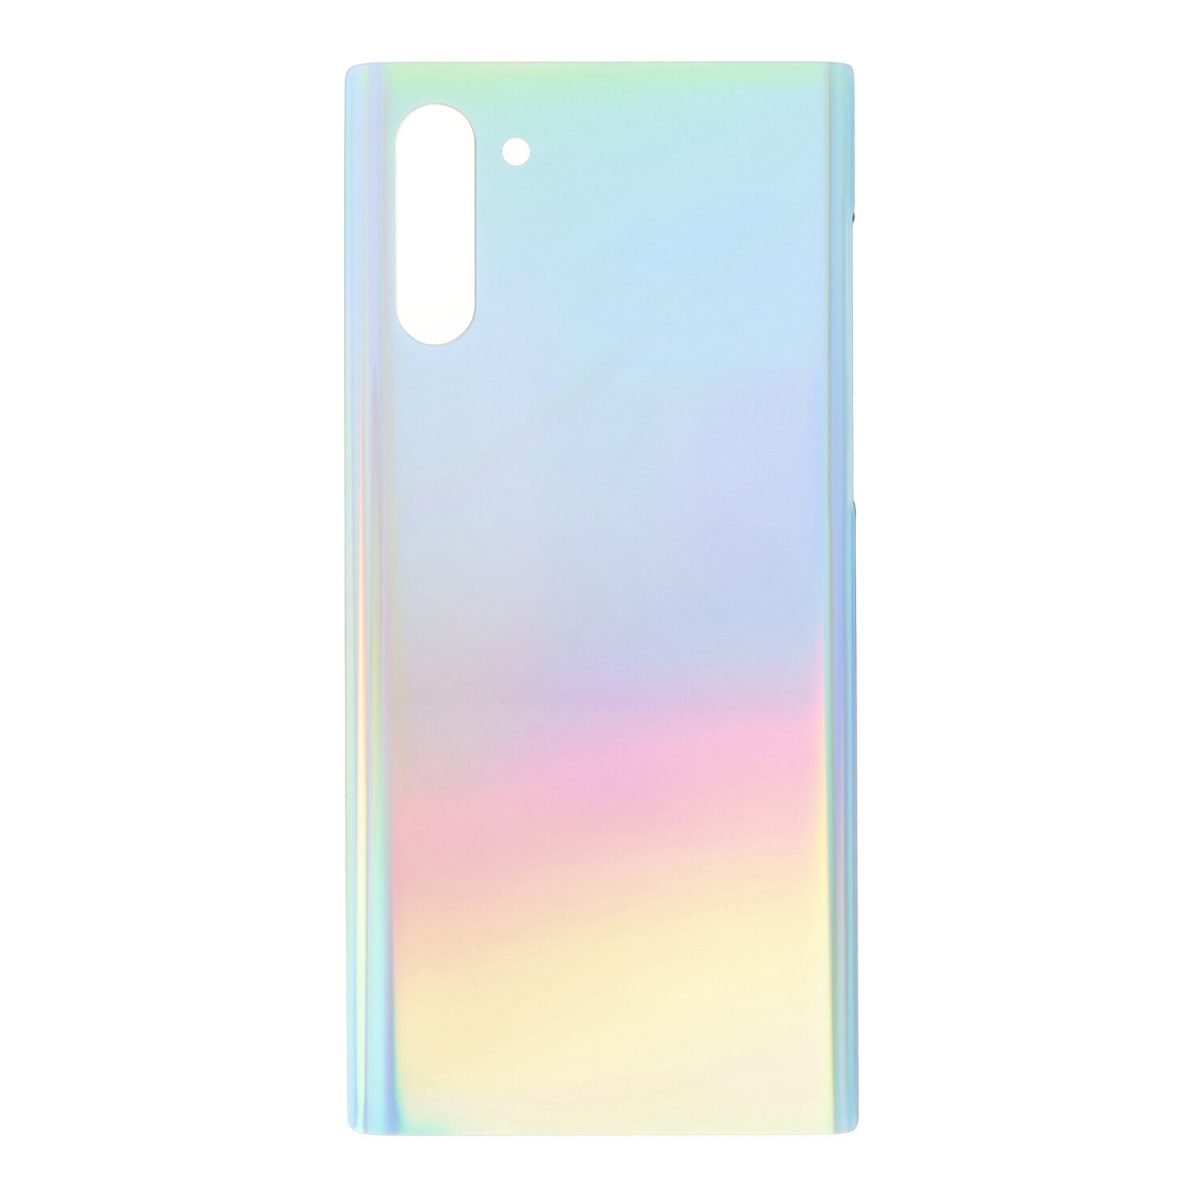 Samsung Galaxy Note 10 Back Cover Glass Replacement (Aurora)